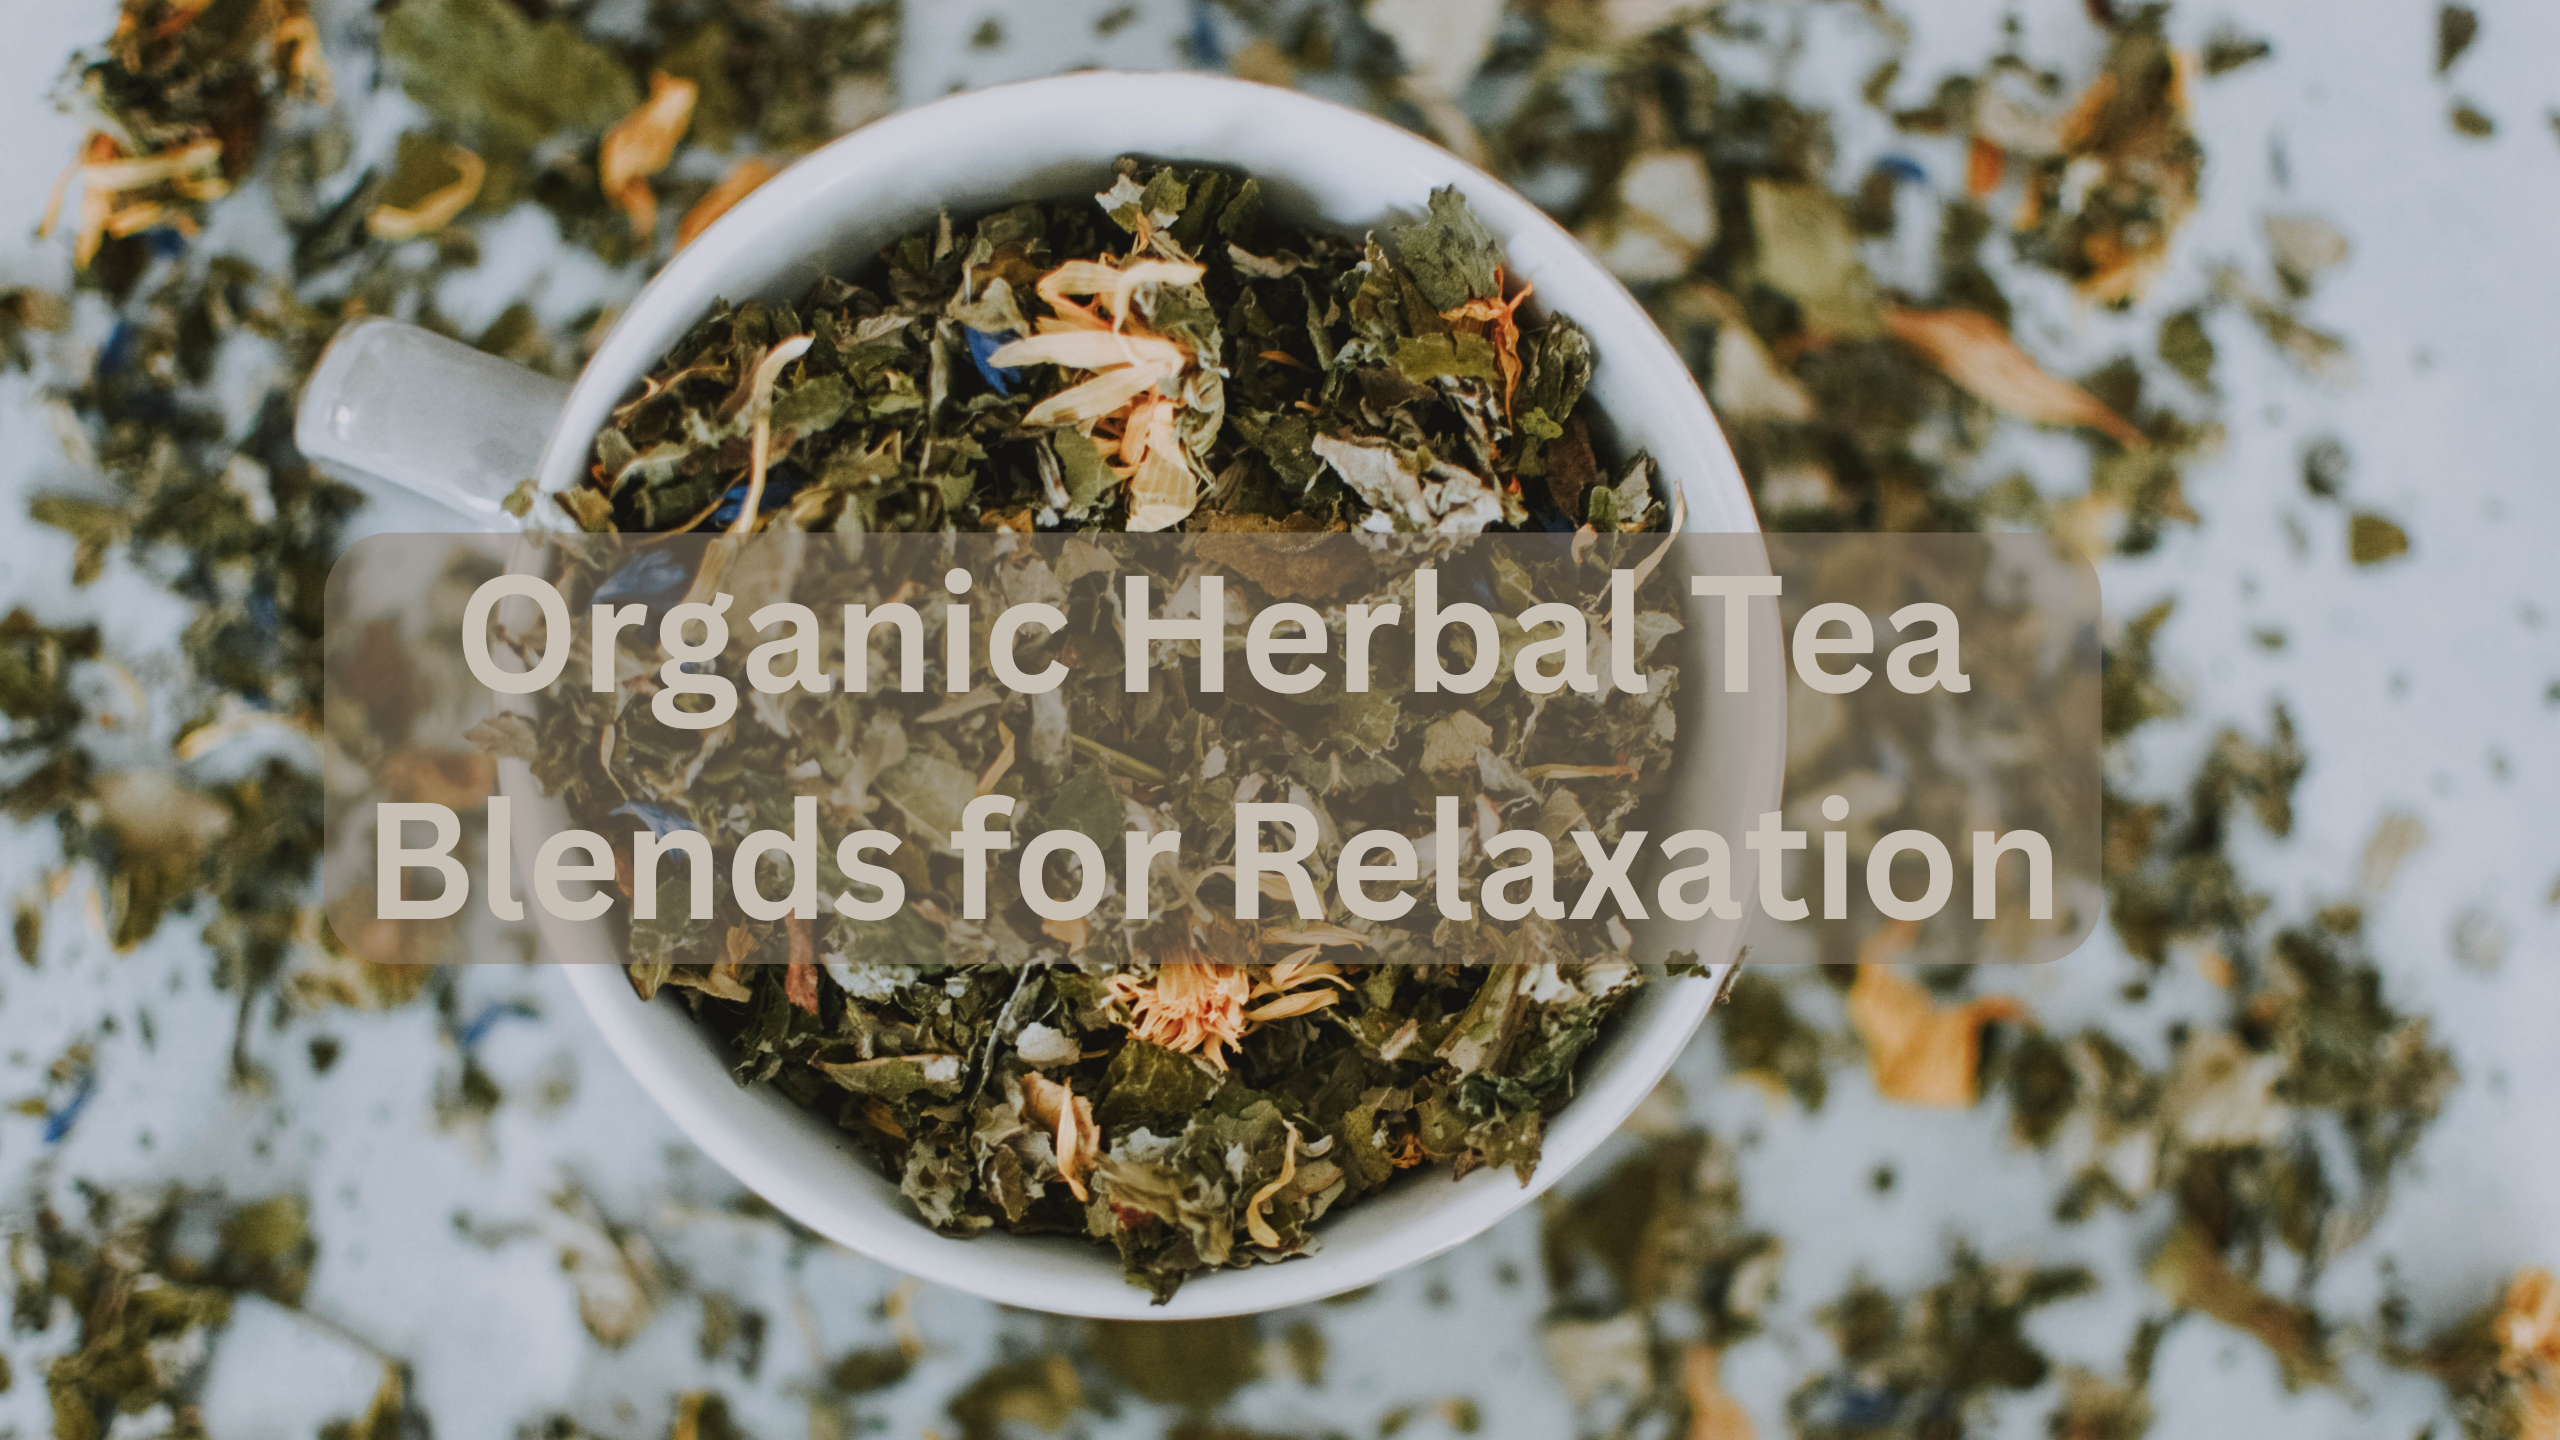 Organic Herbal Tea Blends for Relaxation